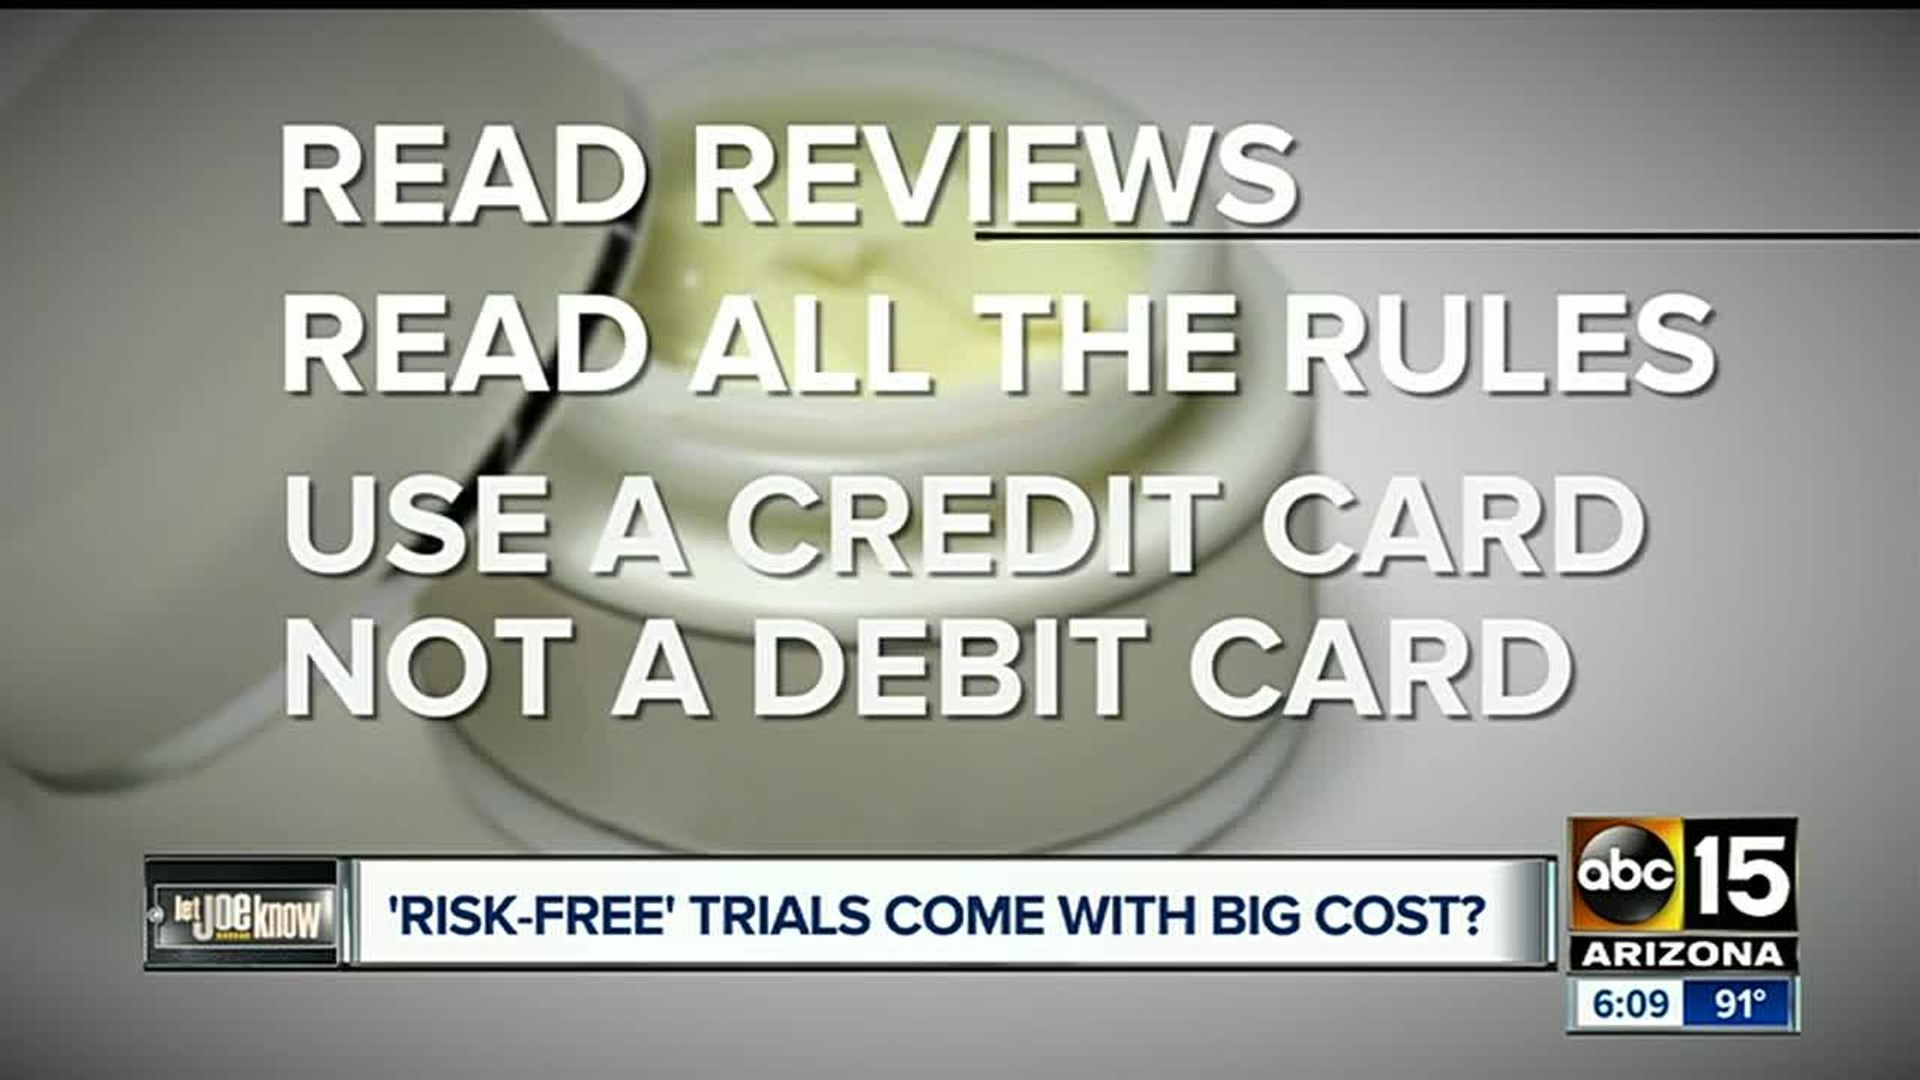 Risk-free trial offers: They come with plenty of risk